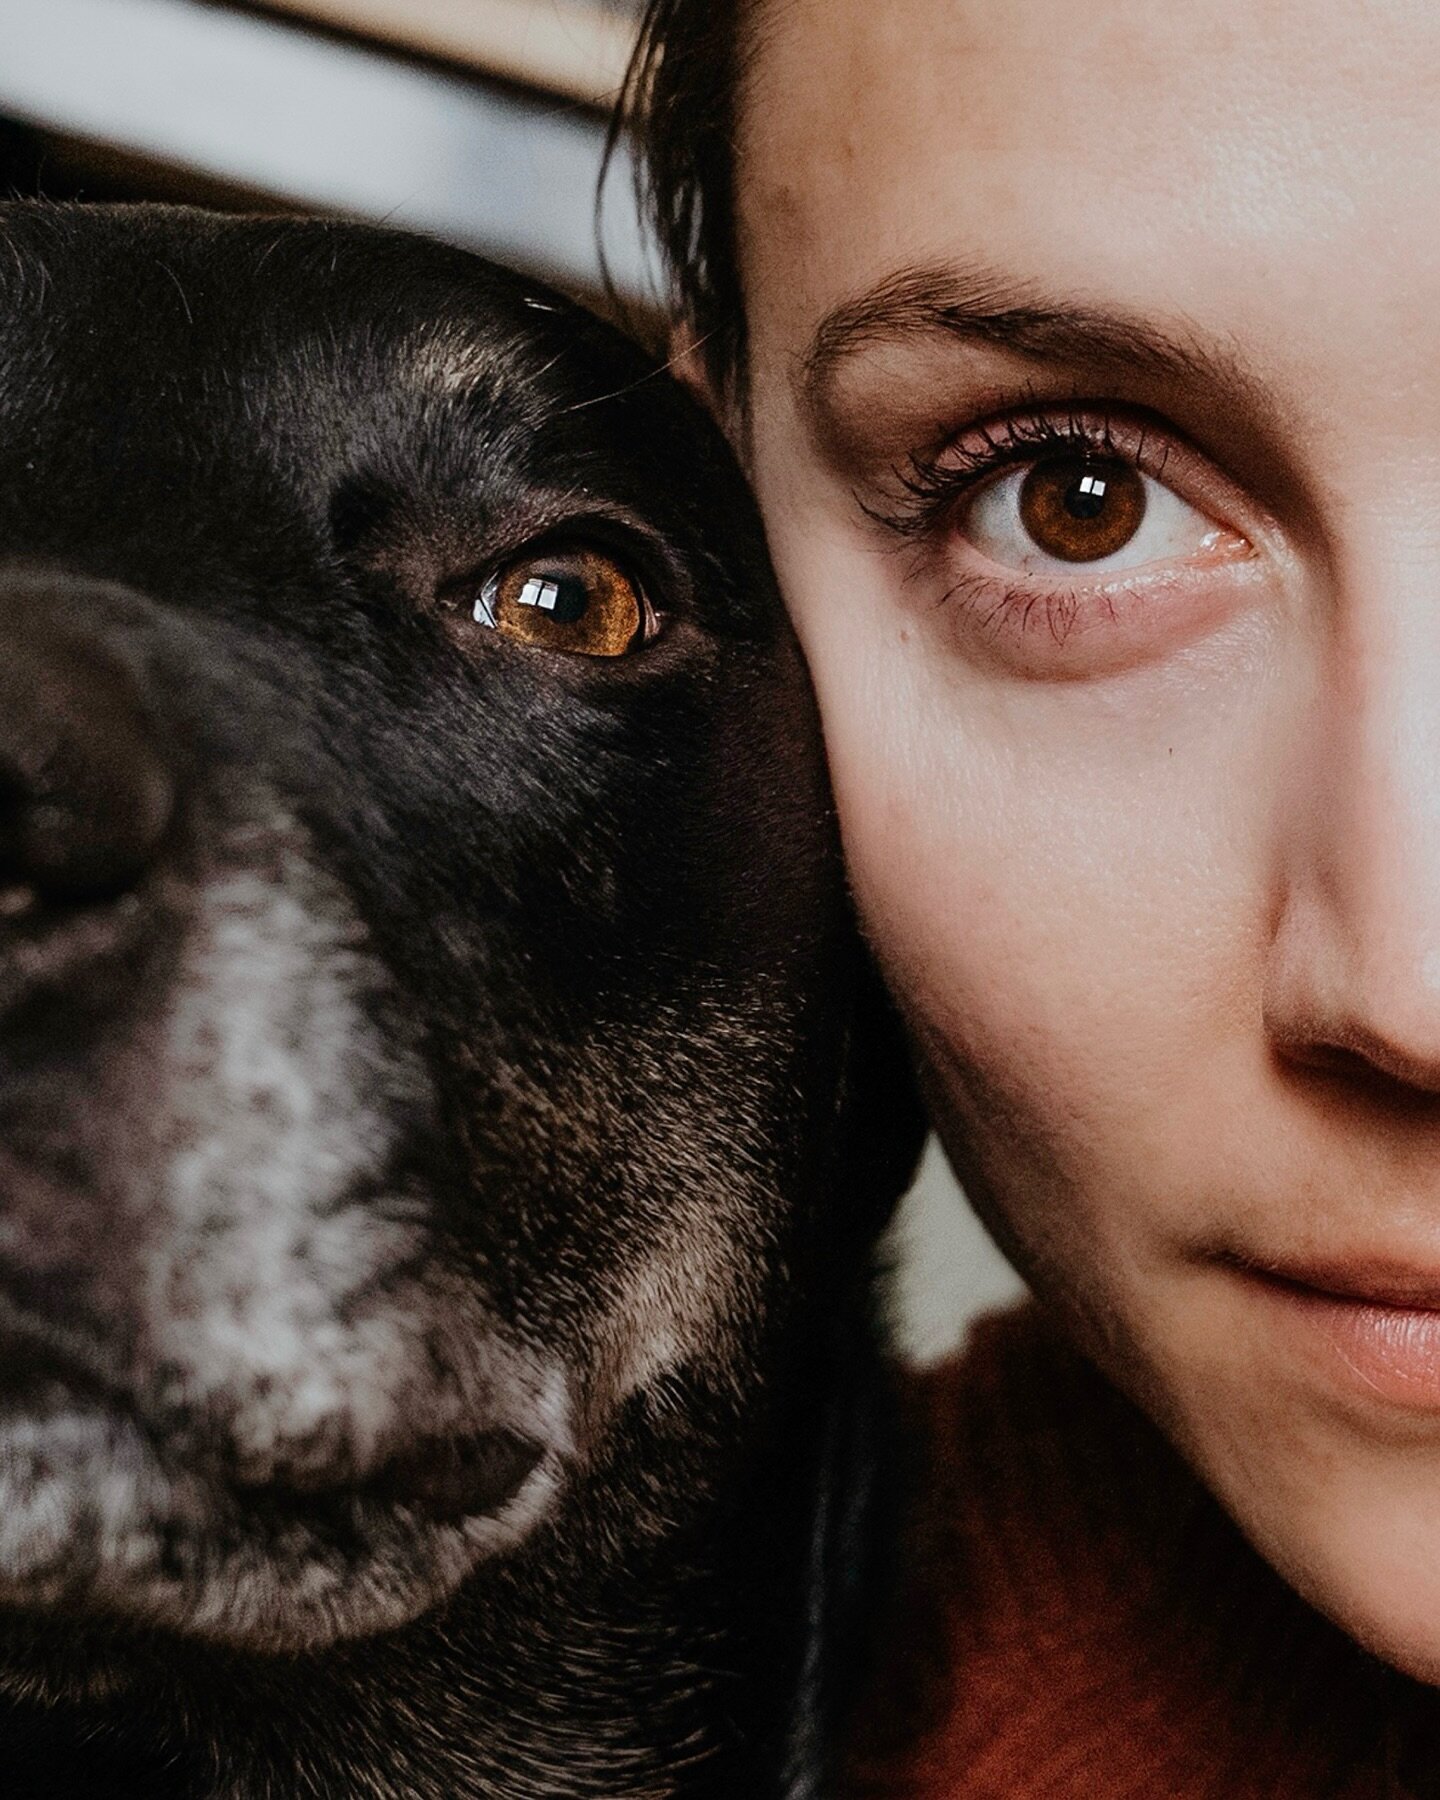 In an effort to get better at showing my face on social media, here is half of my face. 

With my dog Bear (who is basically my other half anyway).